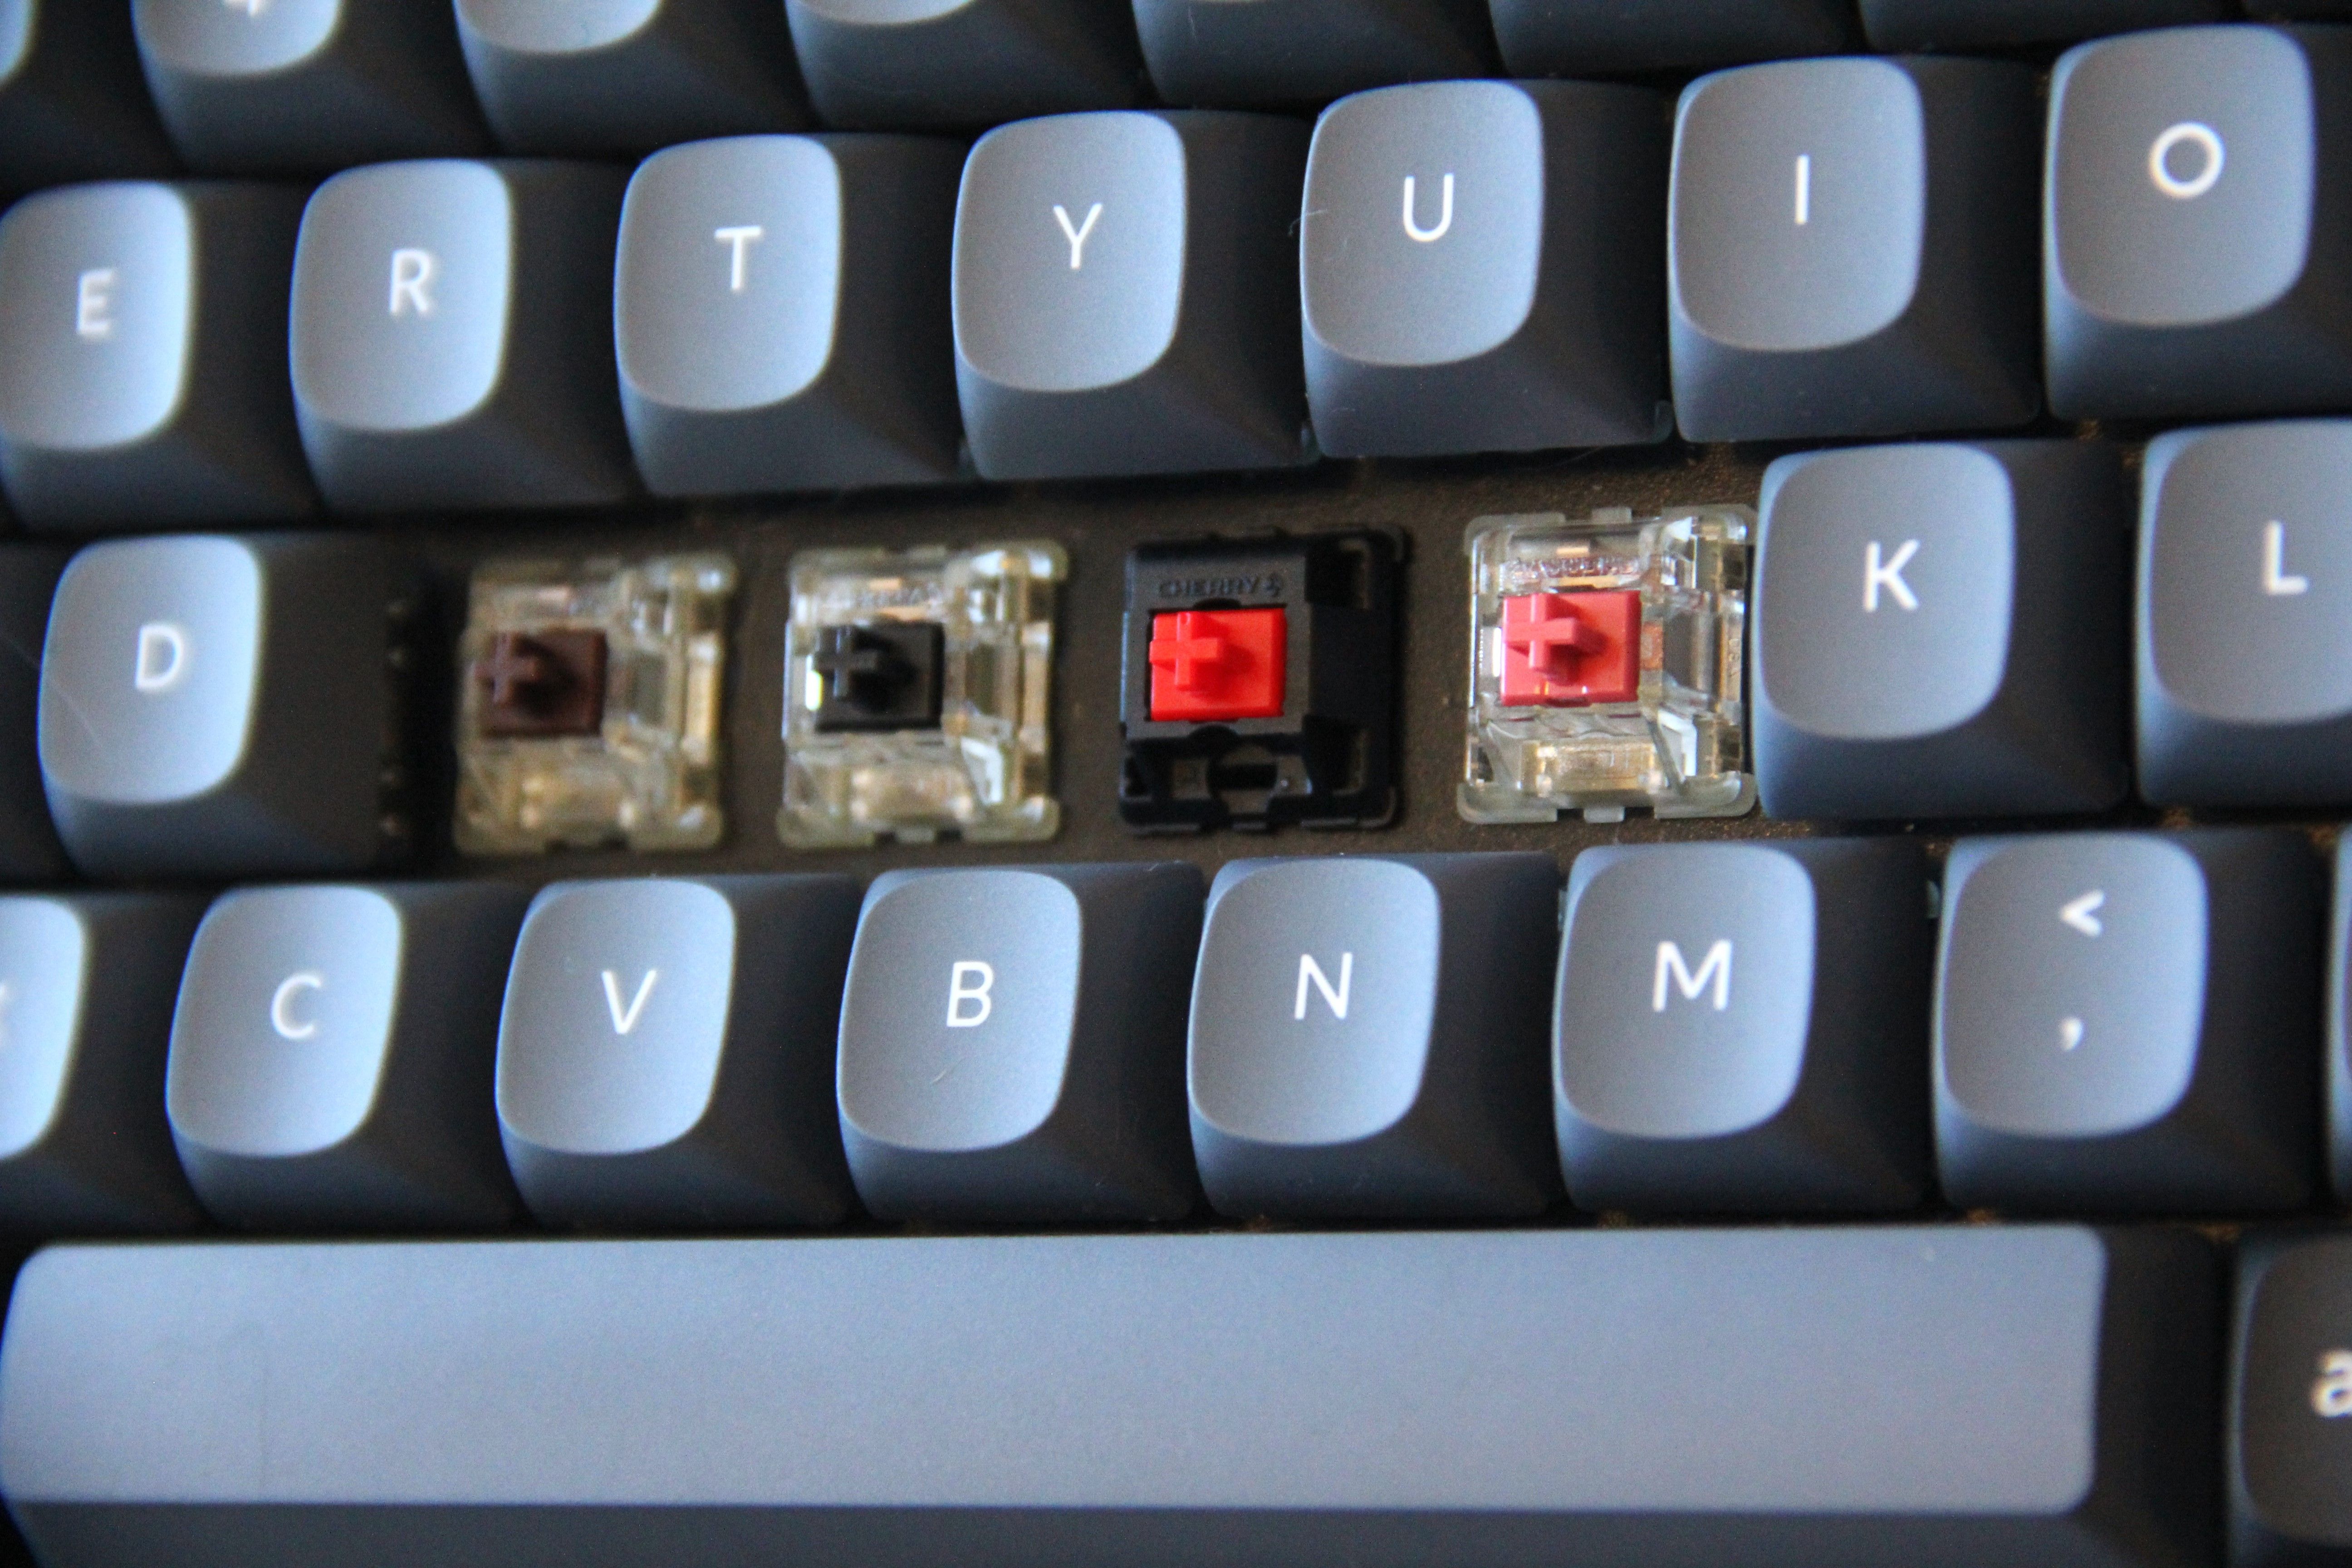 Some Cherry MX2A switches inside a keyboard